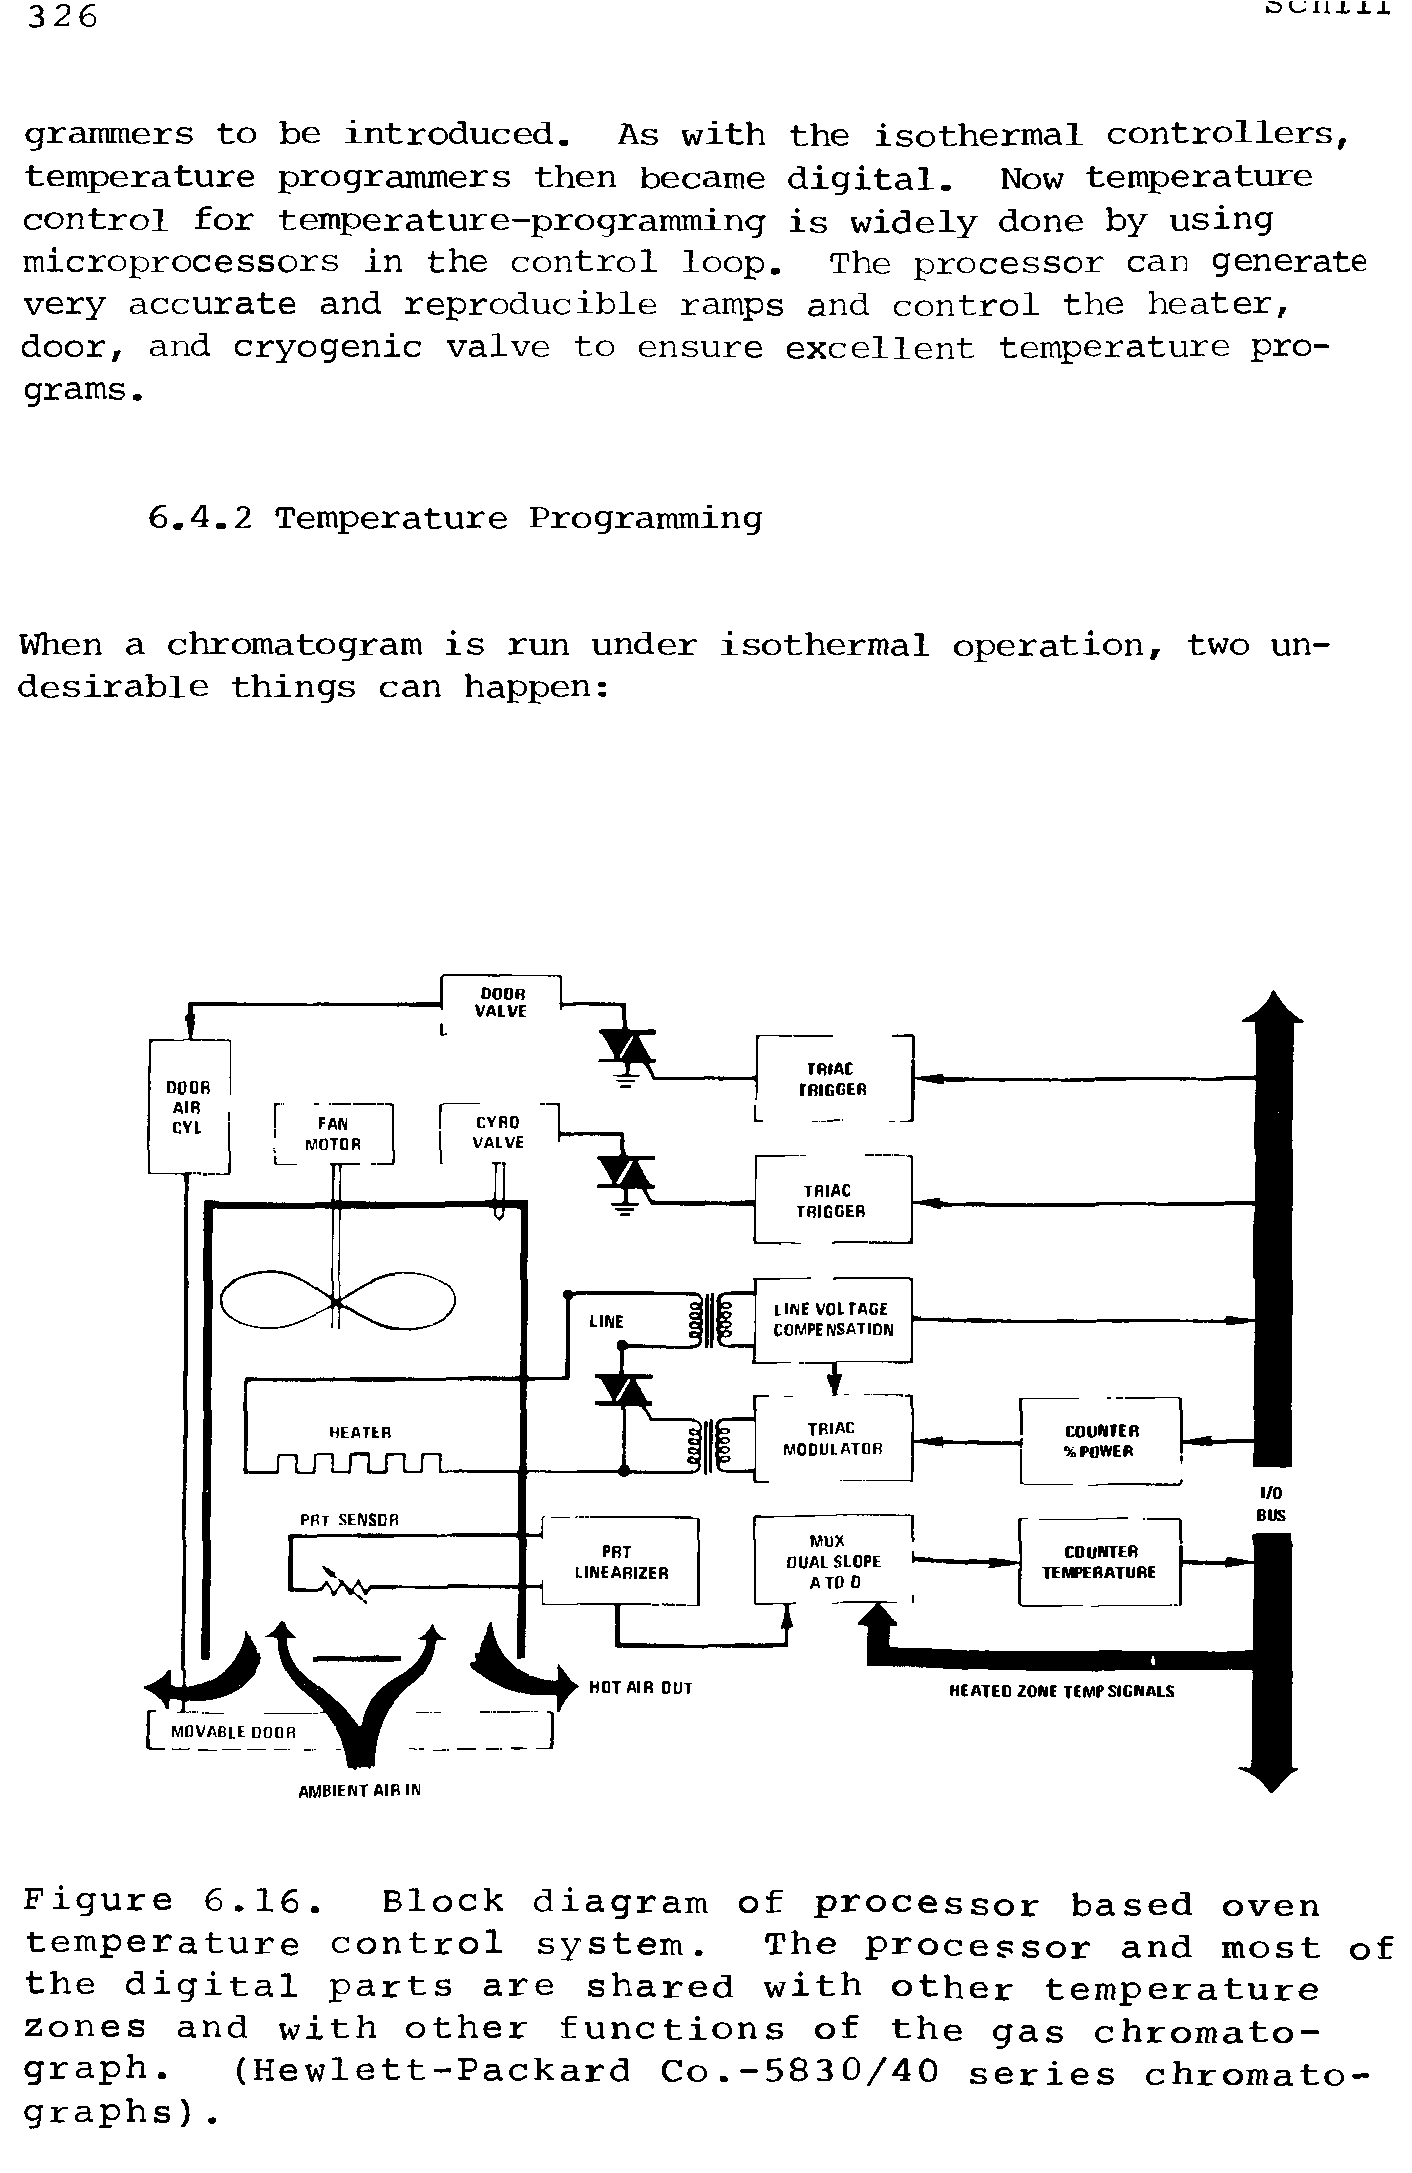 Figure 6.16. Block diagram of processor based oven temperature control system. The processor and most of the digital parts are shared with other temperature zones and with other functions of the gas chromatograph. (Hewlett-Packard Co.—5830/40 series chromatographs ). ...